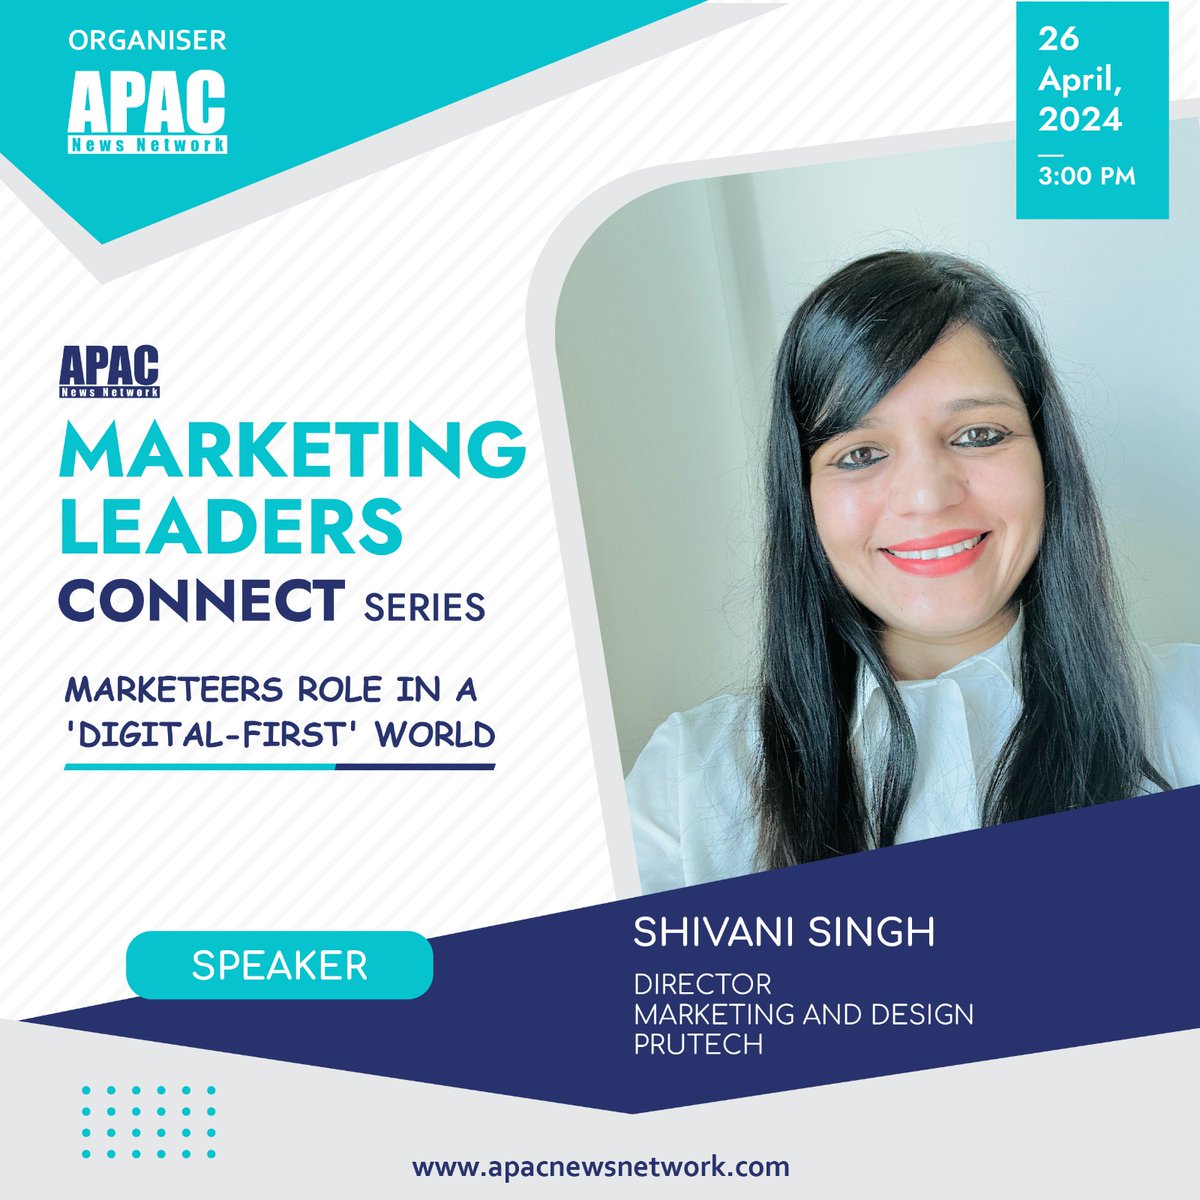 We’re excited! Shivani Singh, Director, Marketing & Design, #Prutech will be joining us as a ' Speaker' at the 'APAC Marketing Leaders Connect Series' on 26th April, 2024. #APACMarketing #Marketing #MarketinTrends #DigitalMarketing #CMO